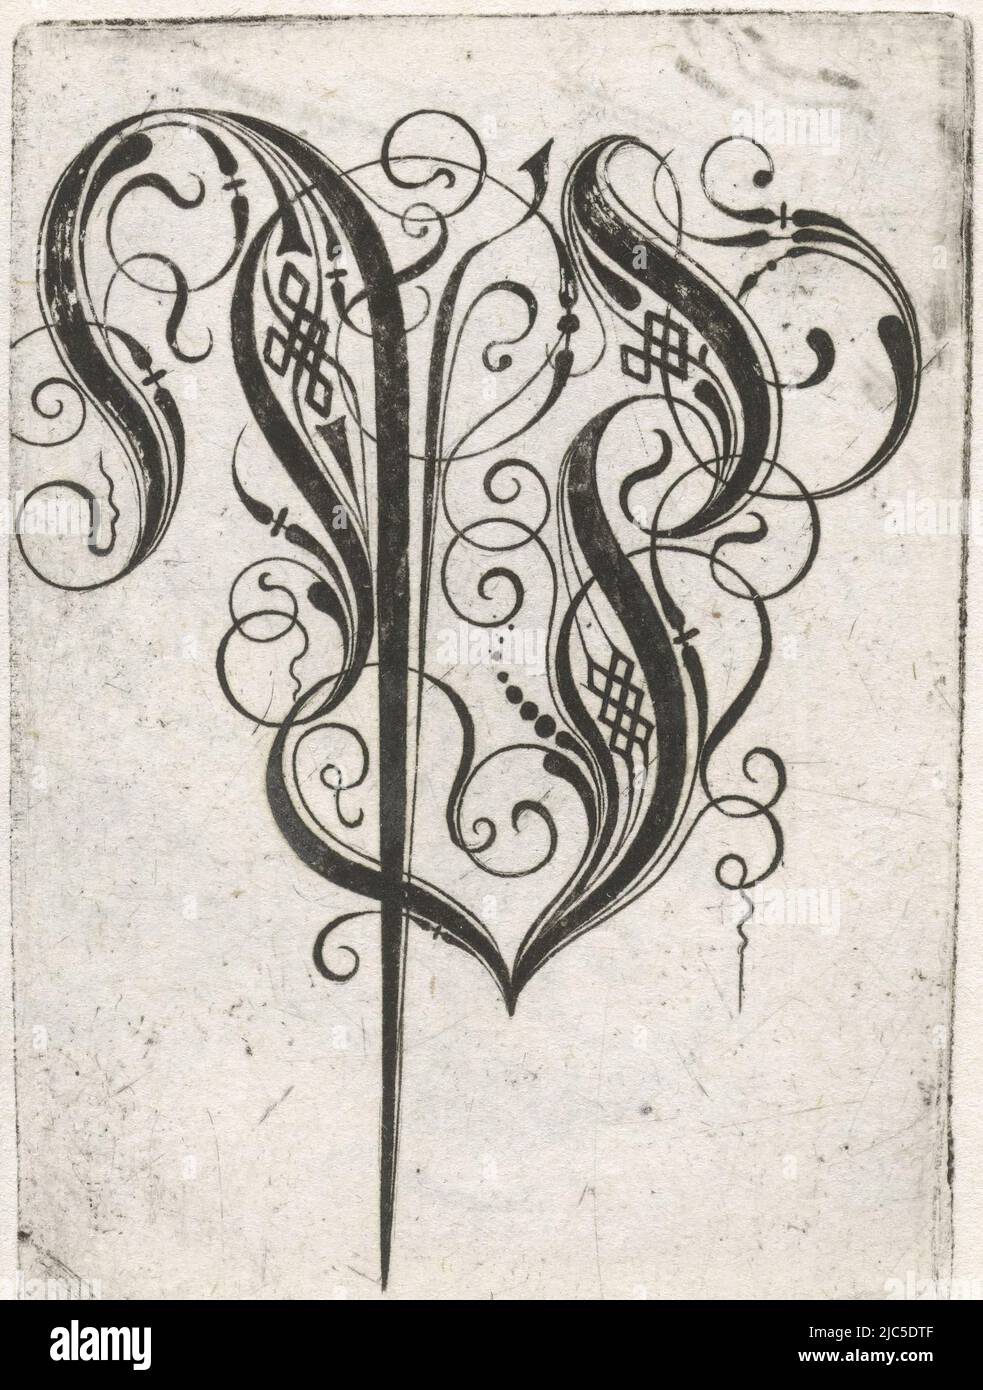 From series of 24 gothic letters with braiding: A-I, K-T and V-Z., Letter P Alphabet (series title), print maker: anonymous, anonymous, publisher: anonymous, Netherlands, (possibly), c. 1600 - c. 1699, h 65 mm - w 46 mm Stock Photo